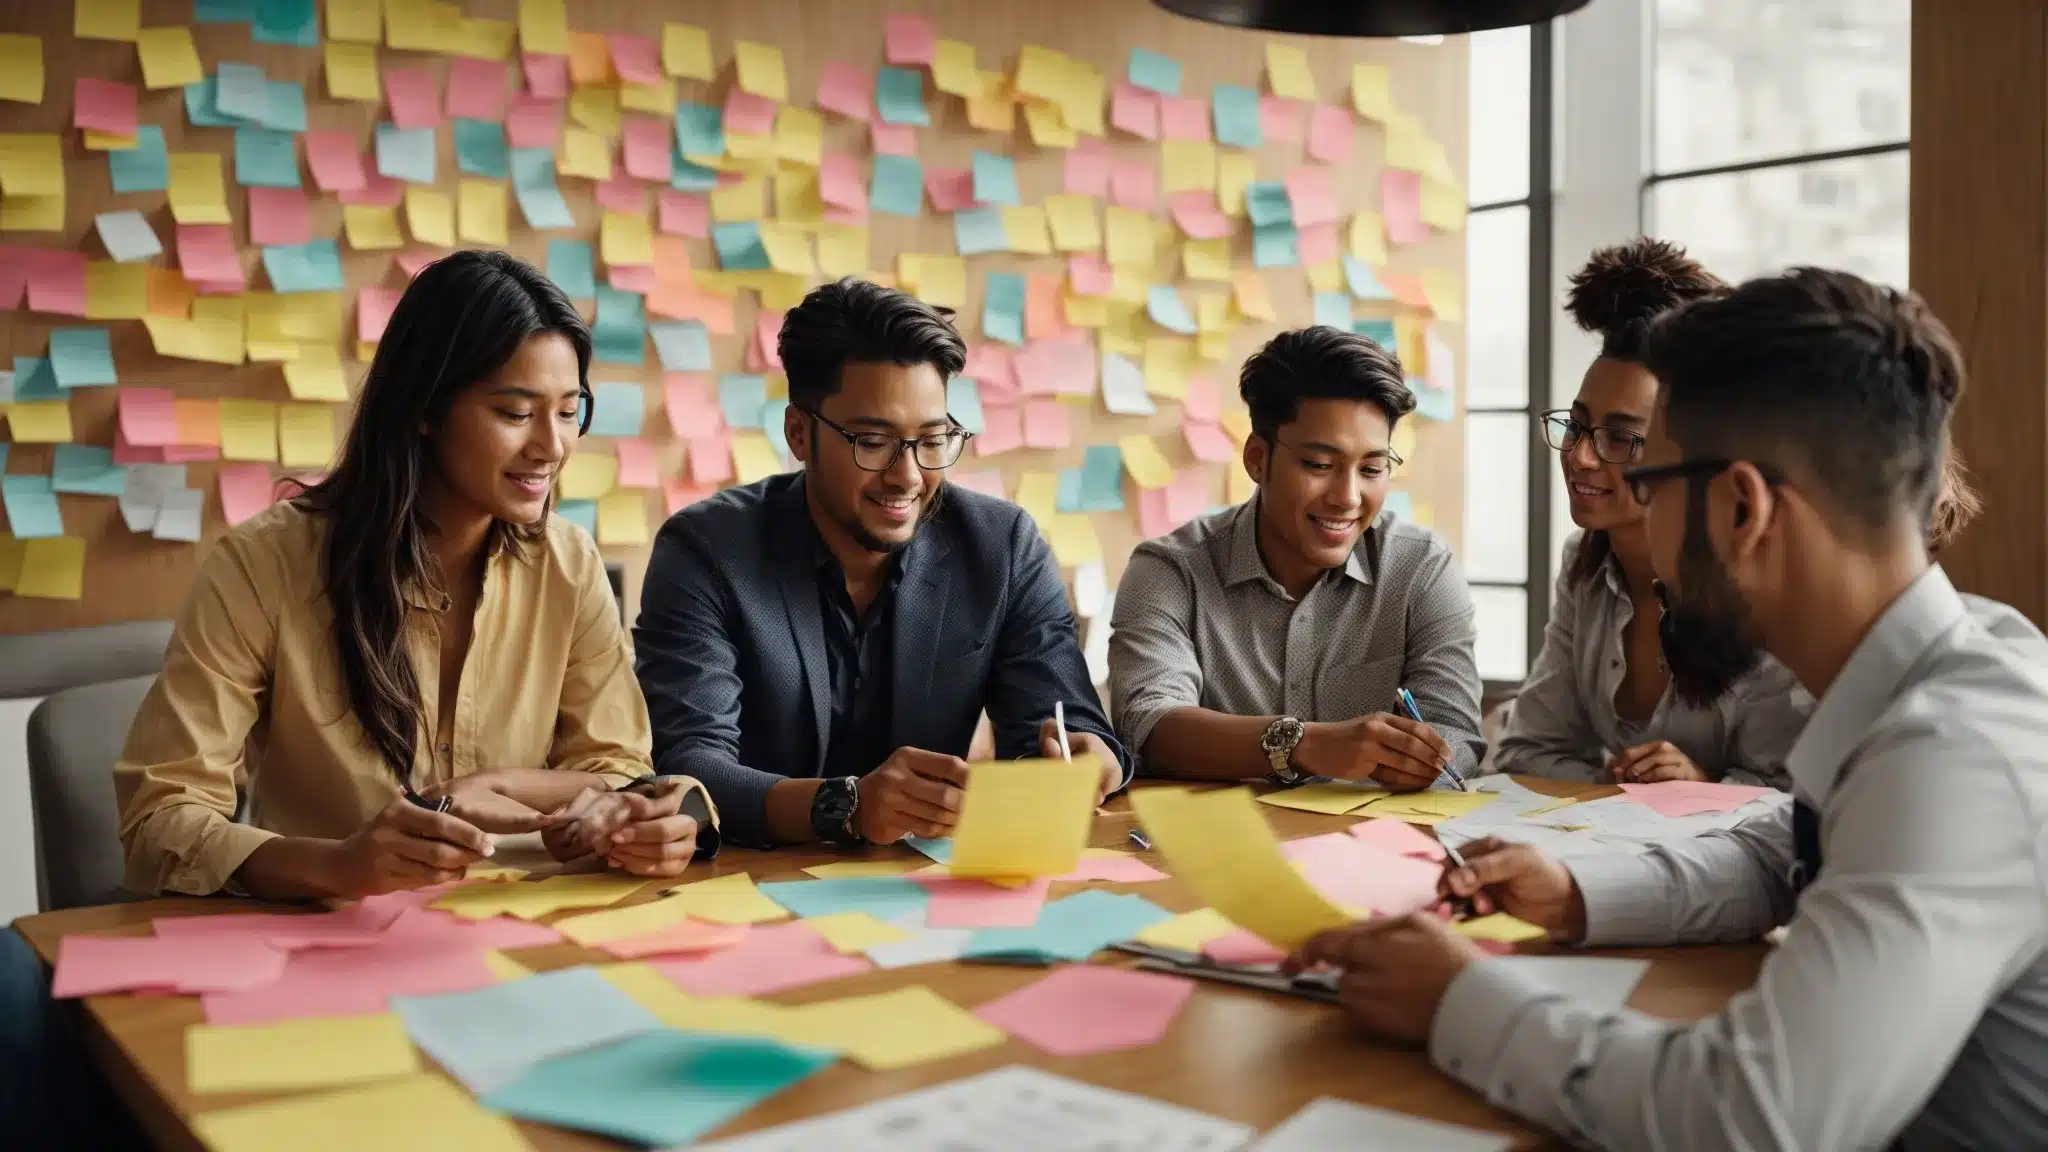 A Marketing Team Engages In A Lively Brainstorming Session Around A Table With Colorful Sticky Notes And Charts Depicting Customer Demographics.